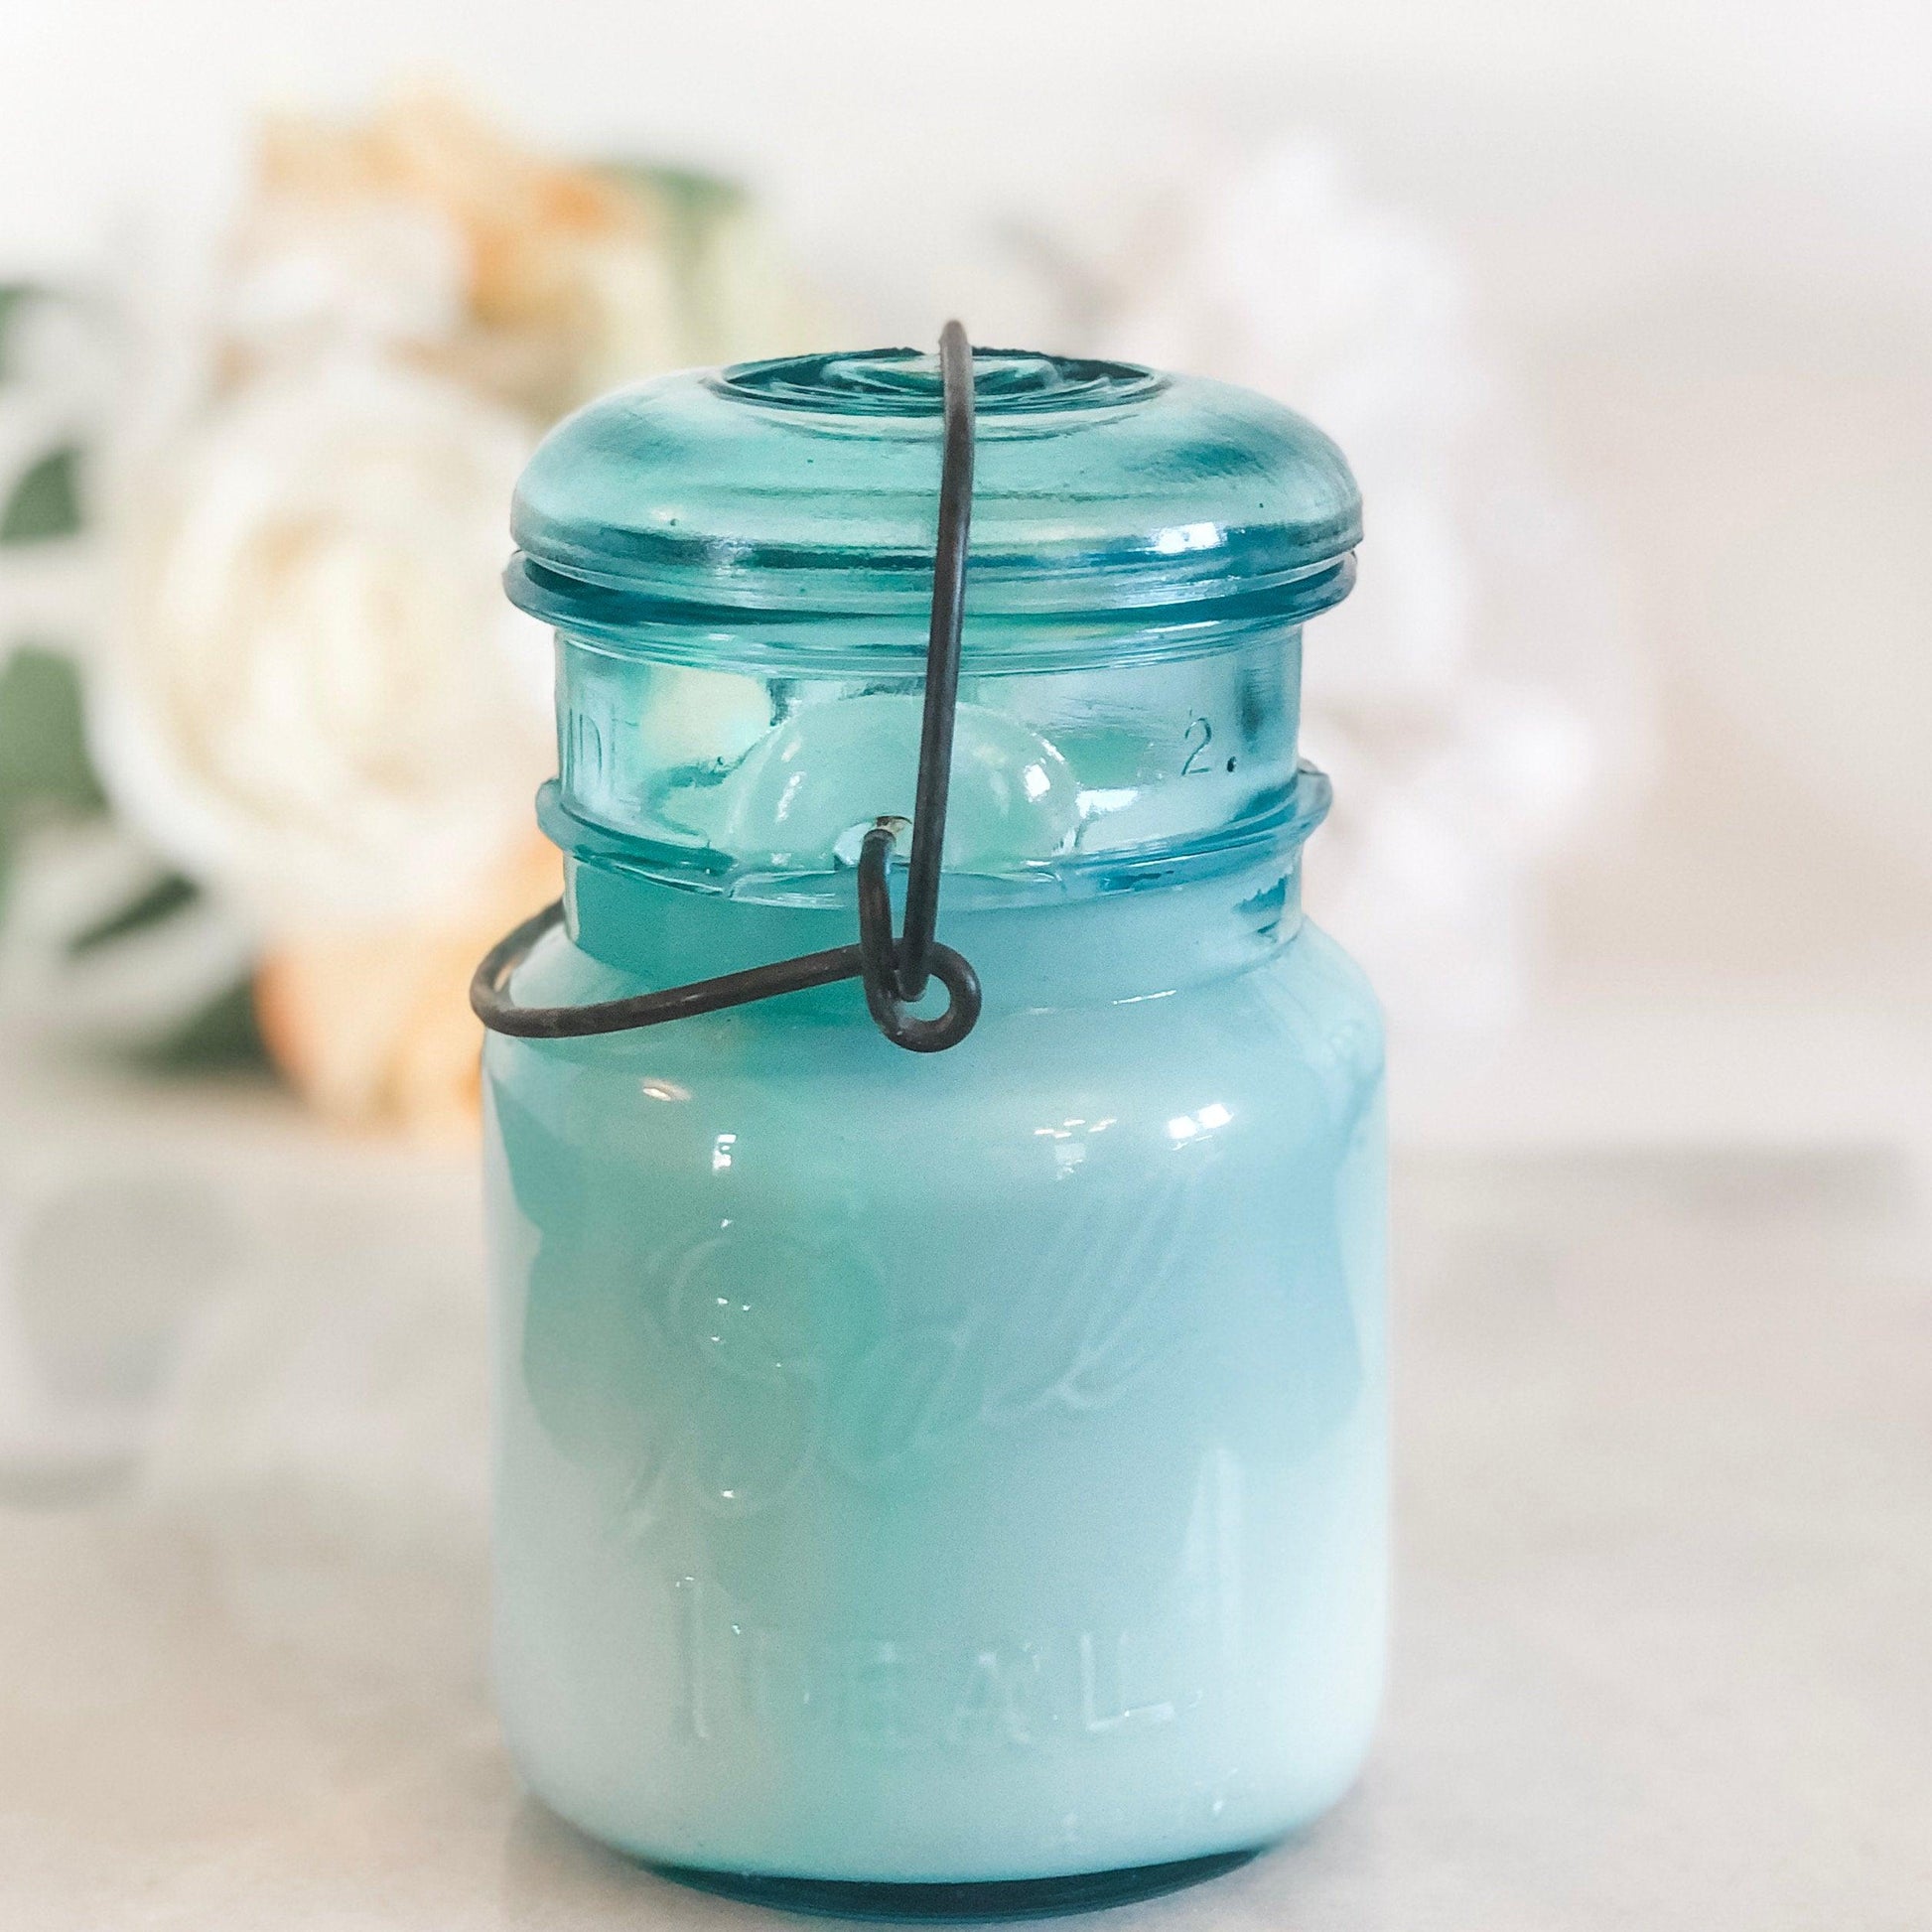 Scented Candle in Vintage Mason Canning Jar - RetroWix 